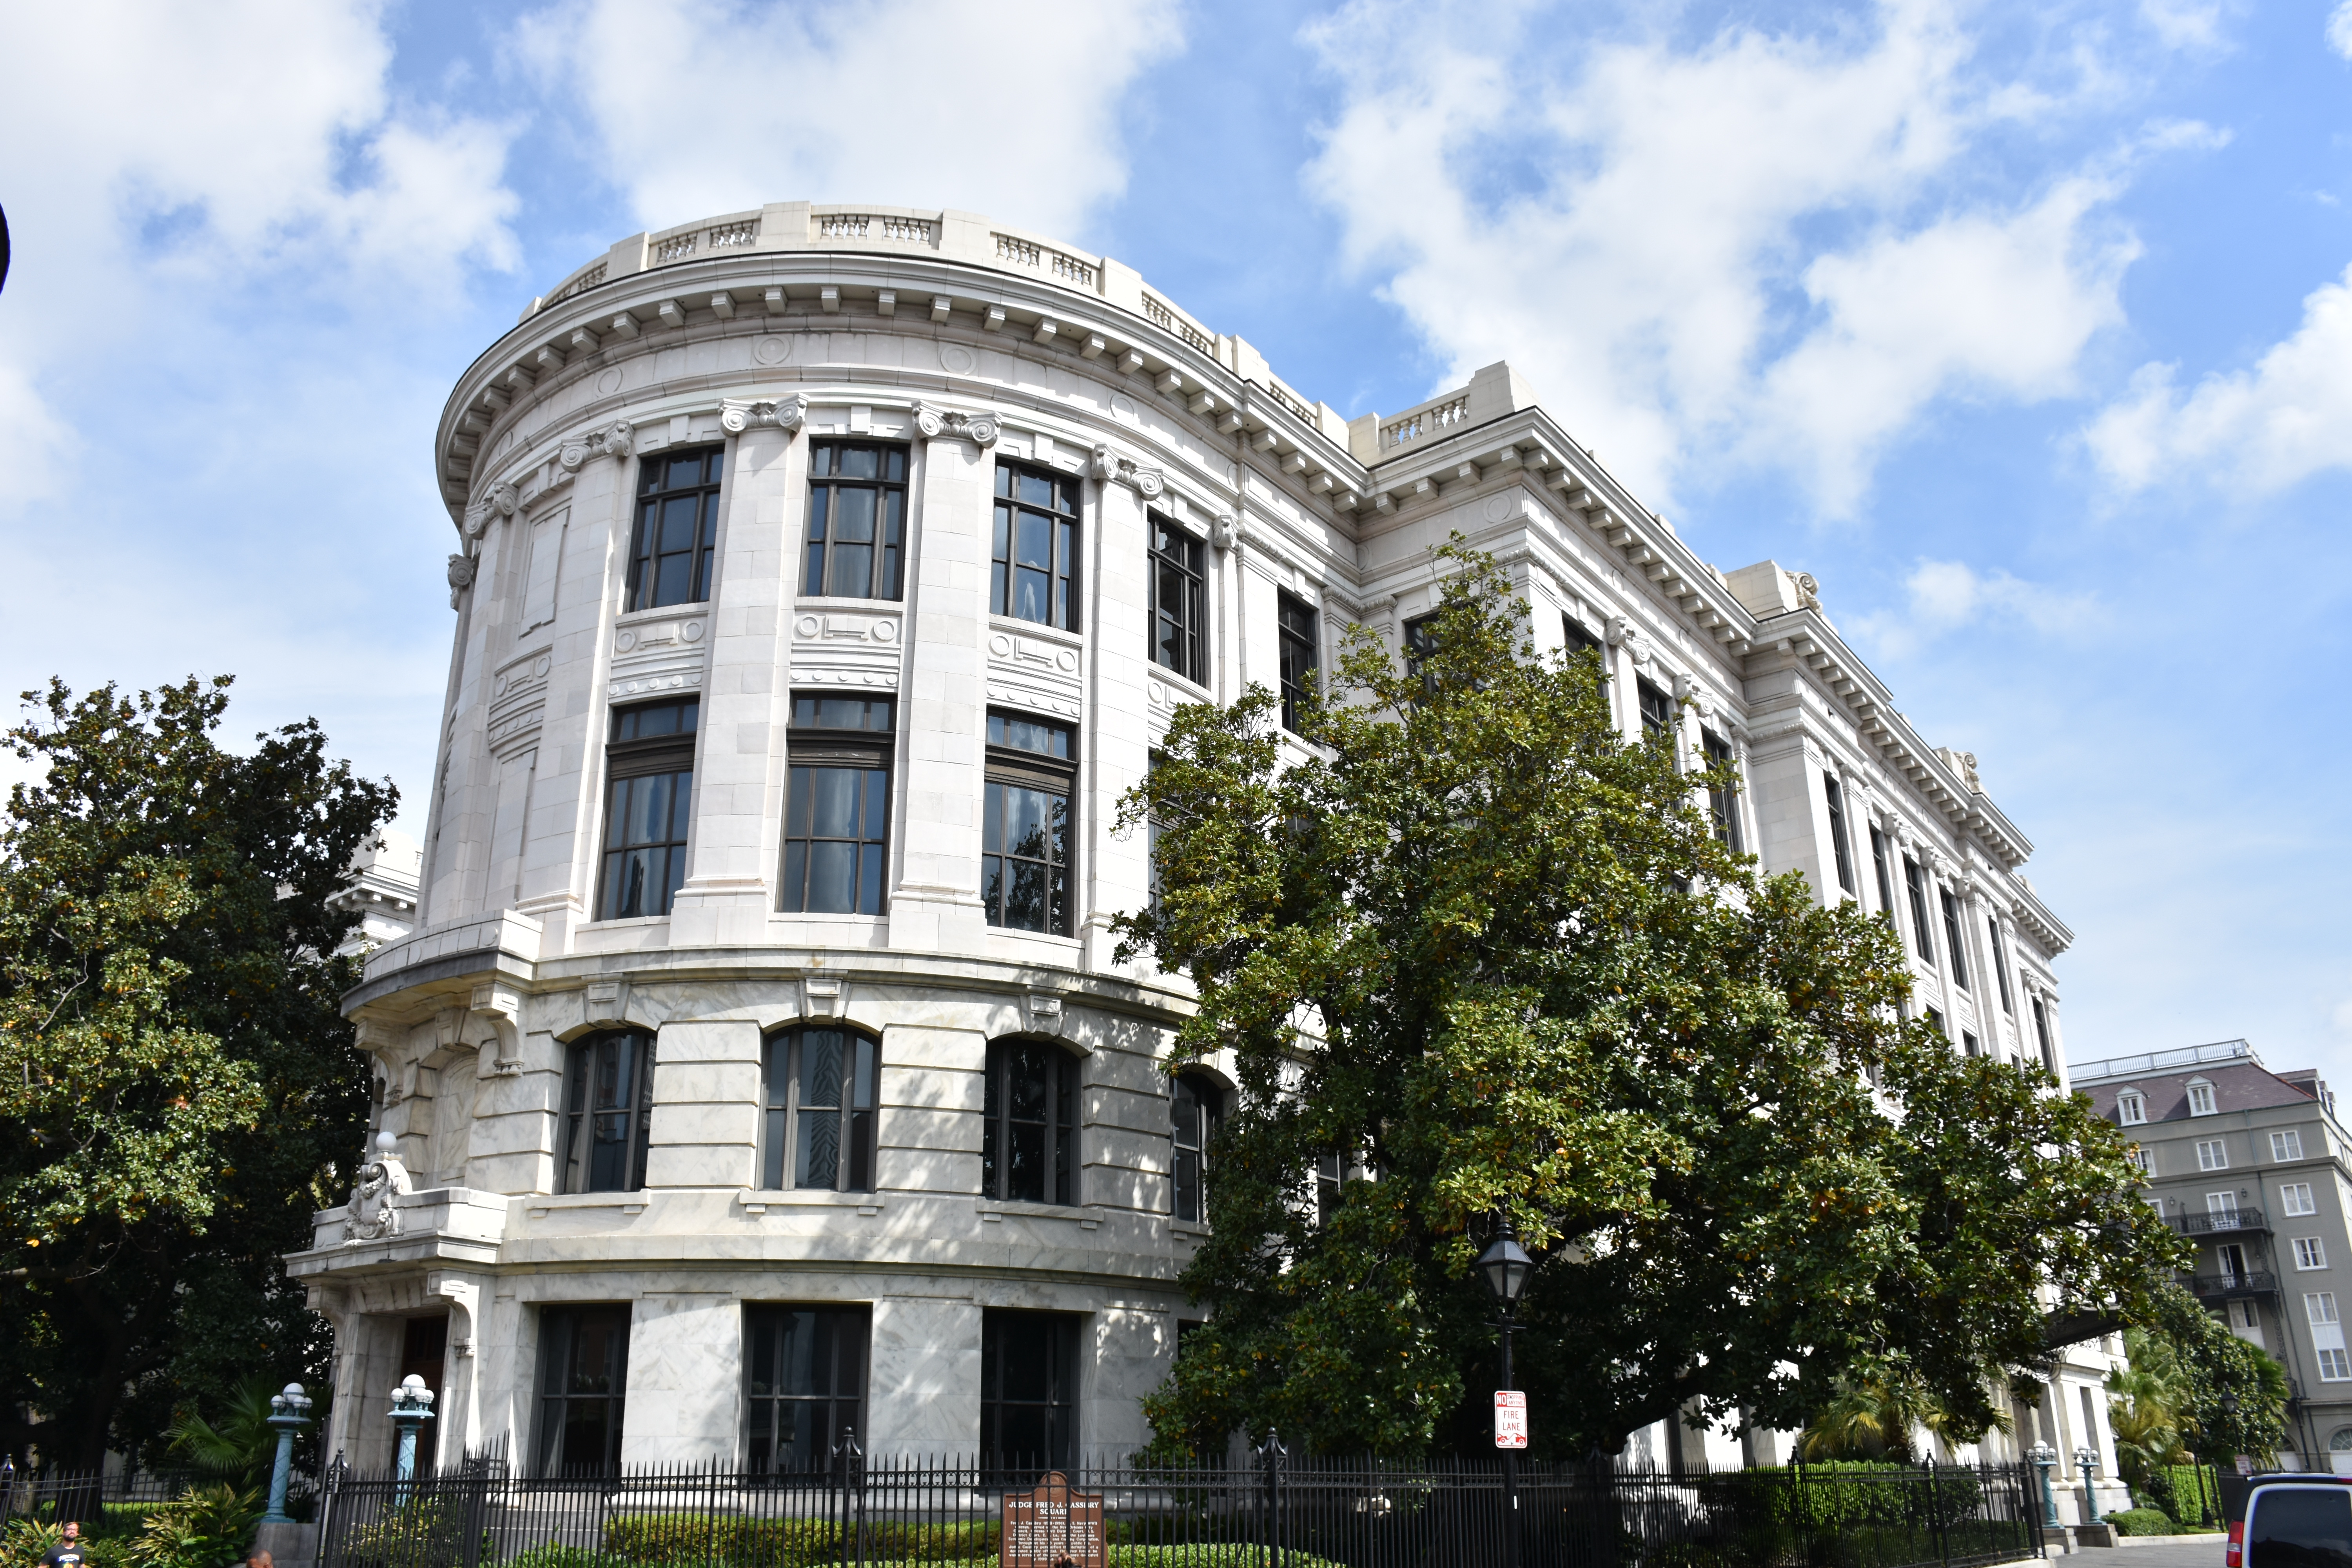 File:Louisiana Supreme Court in New Orleans 2.JPG - Wikimedia Commons